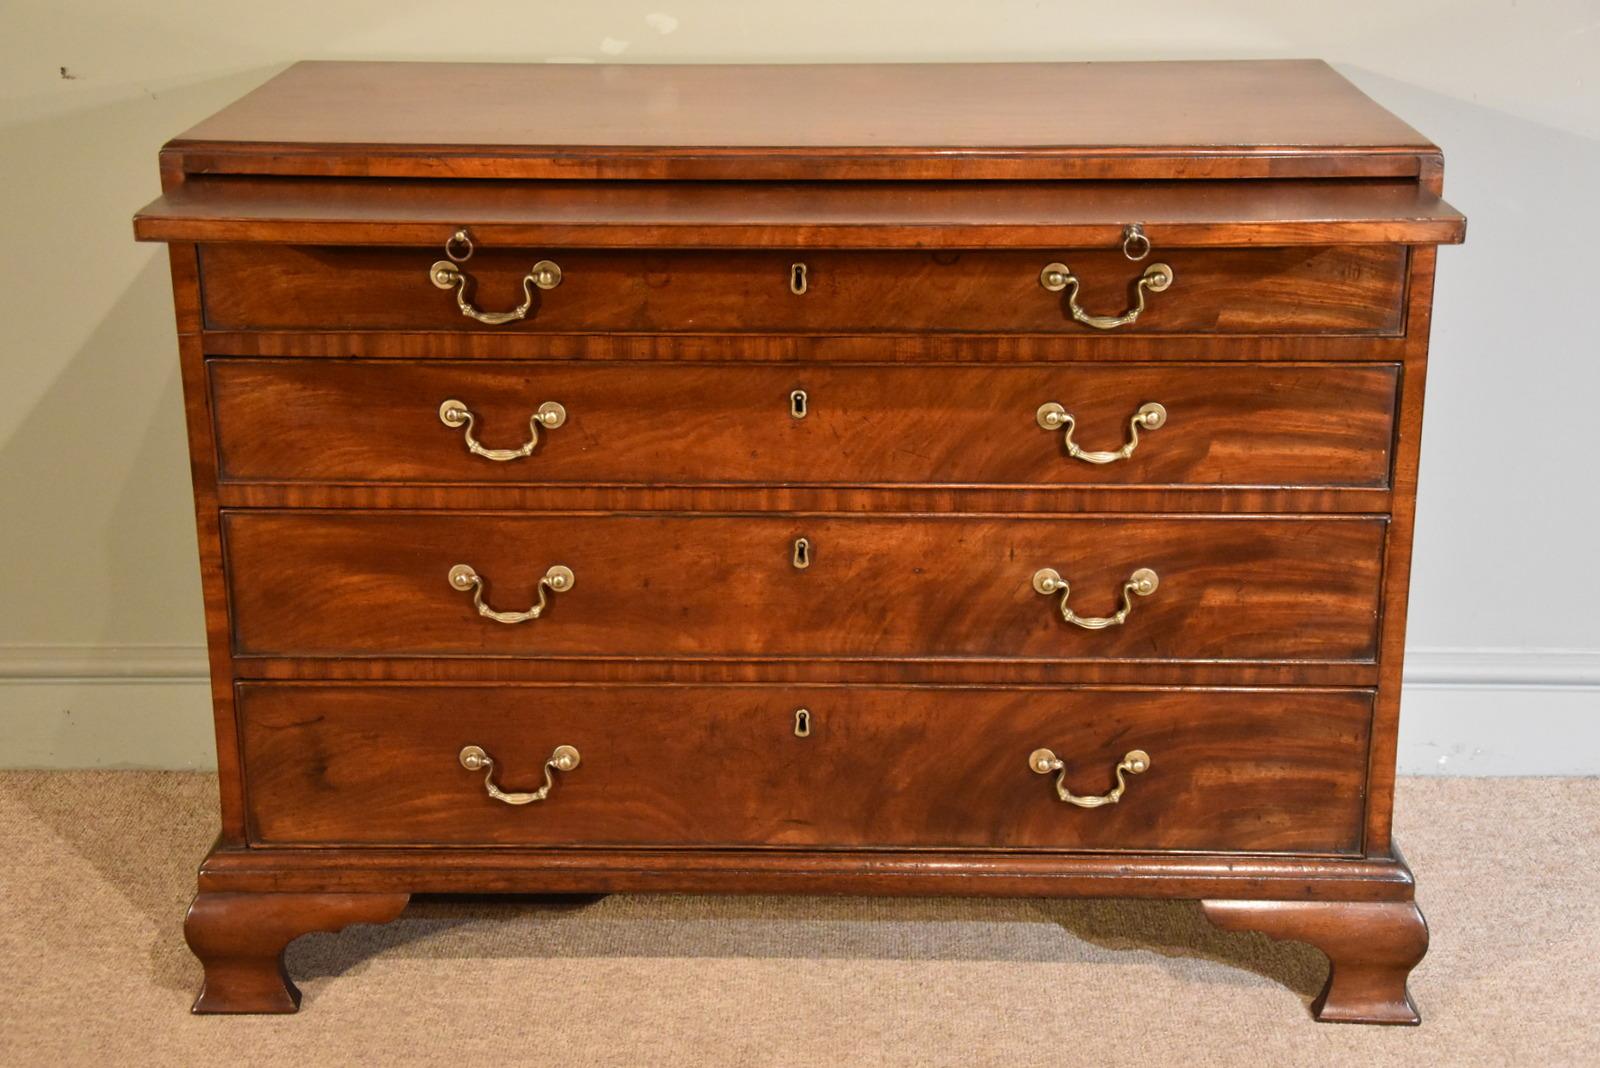 Fine George III mahogany graduated chest of drawers with brushing slide of commode proportions with original brasses and later feet.

Dimensions:
height 31” (79cm)
width 41